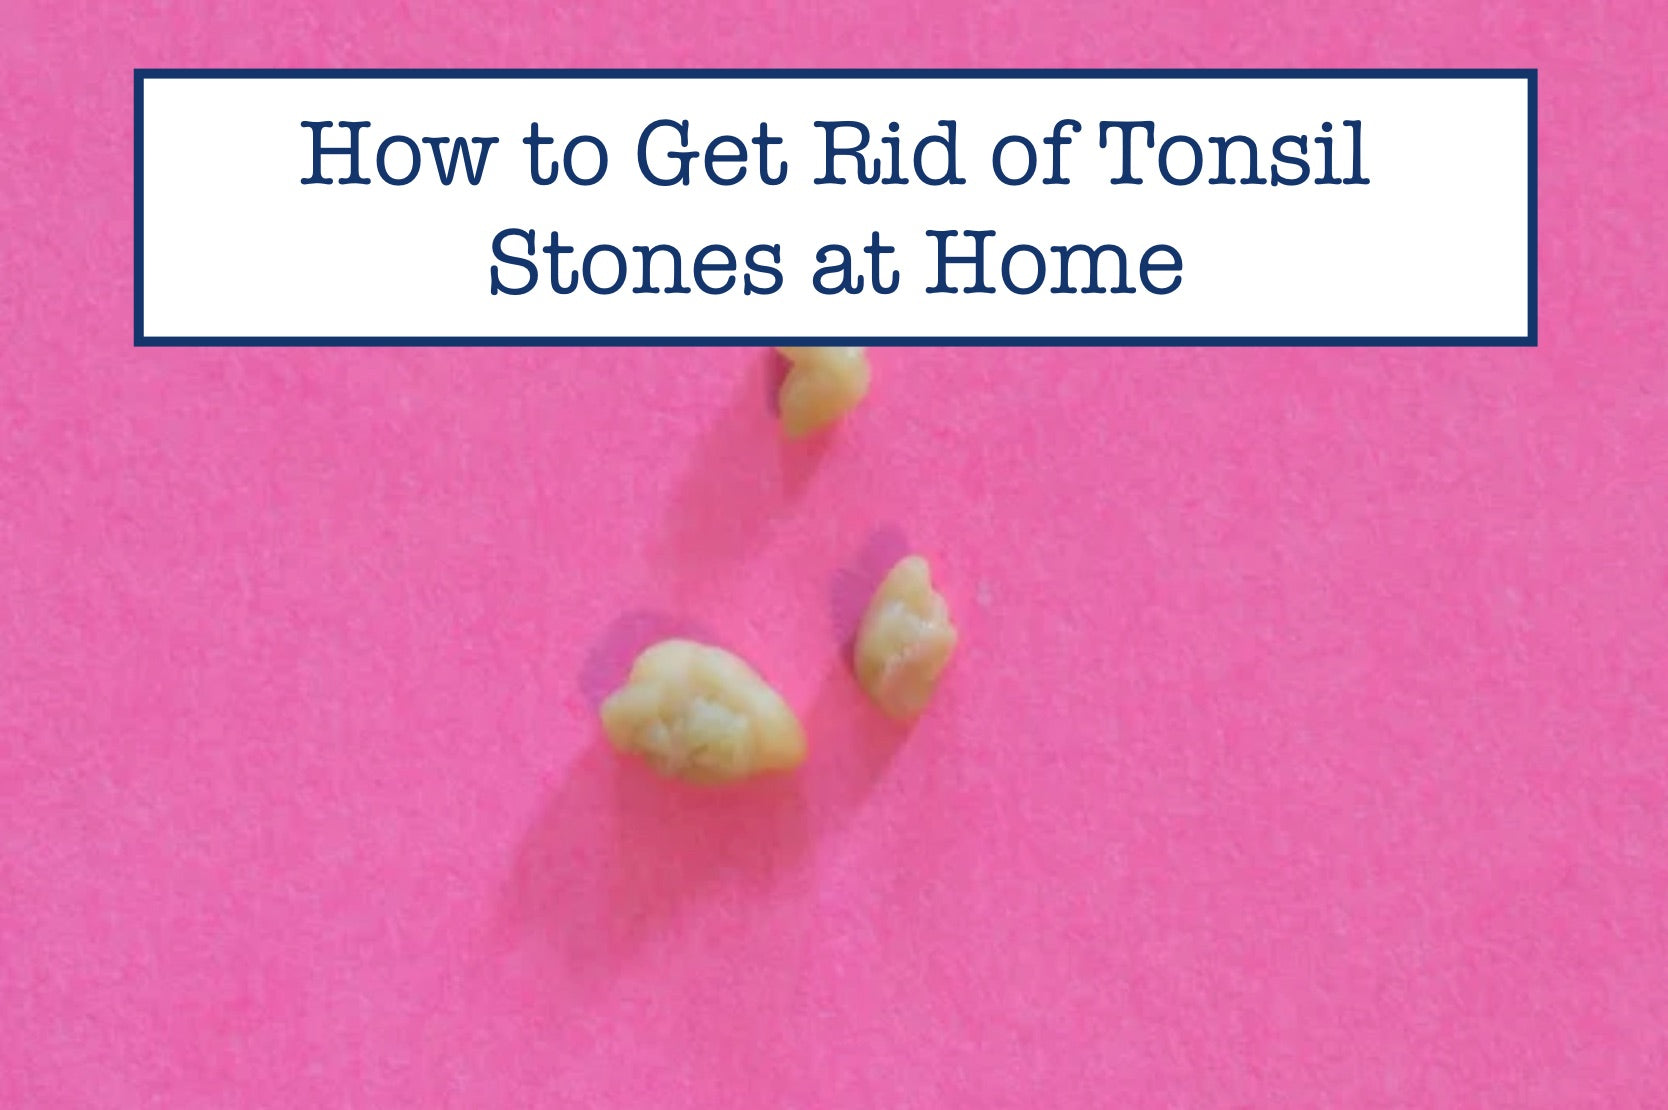 How to Get Rid of Tonsil Stones at Home